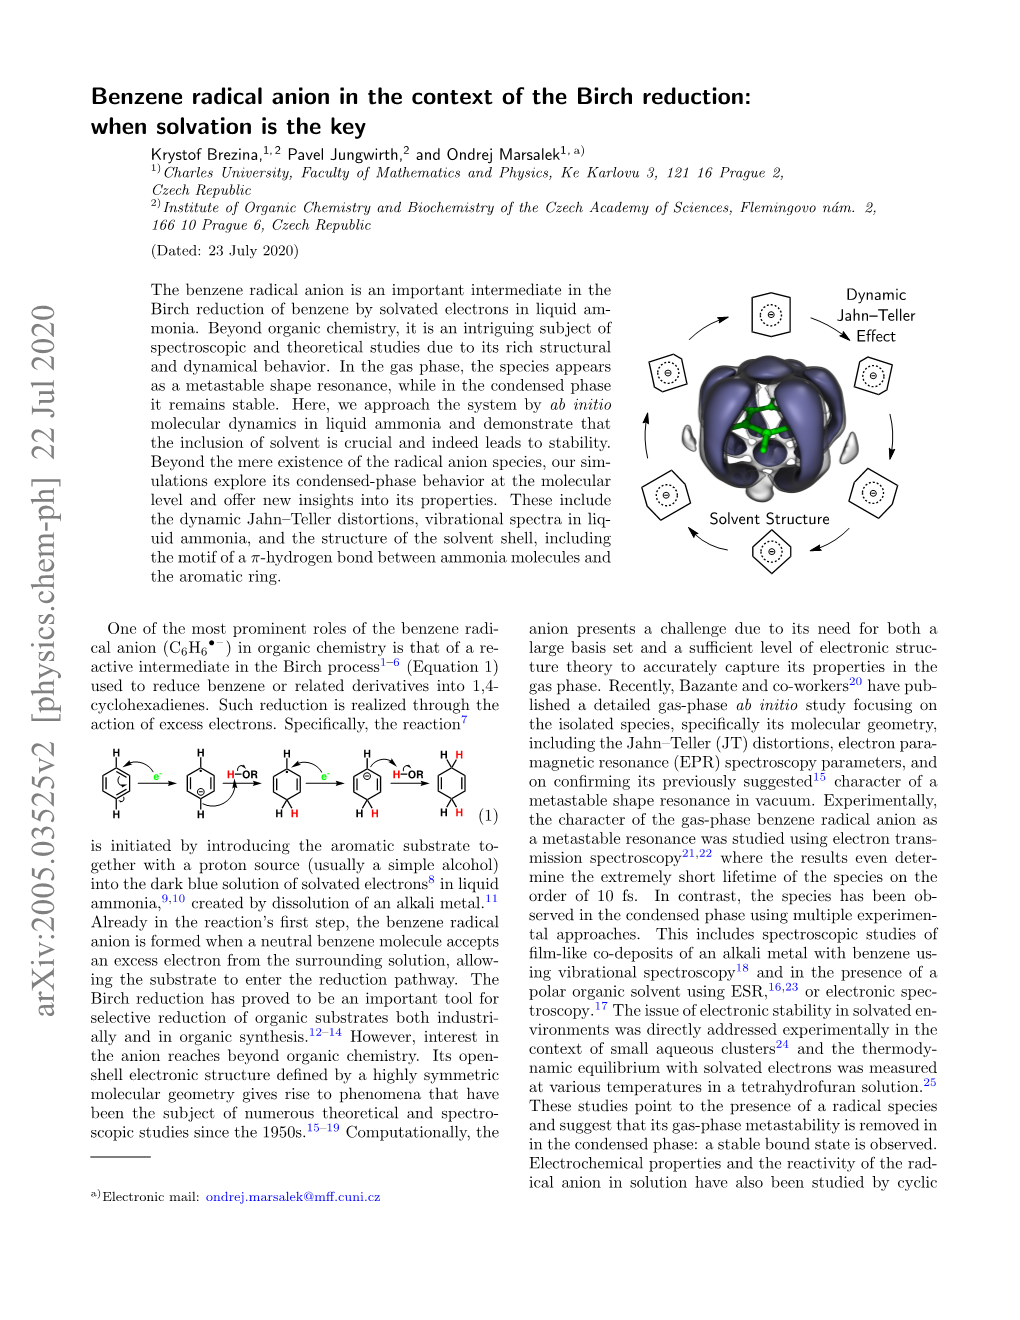 Benzene Radical Anion in the Context of the Birch Reduction: When Solvation Is The